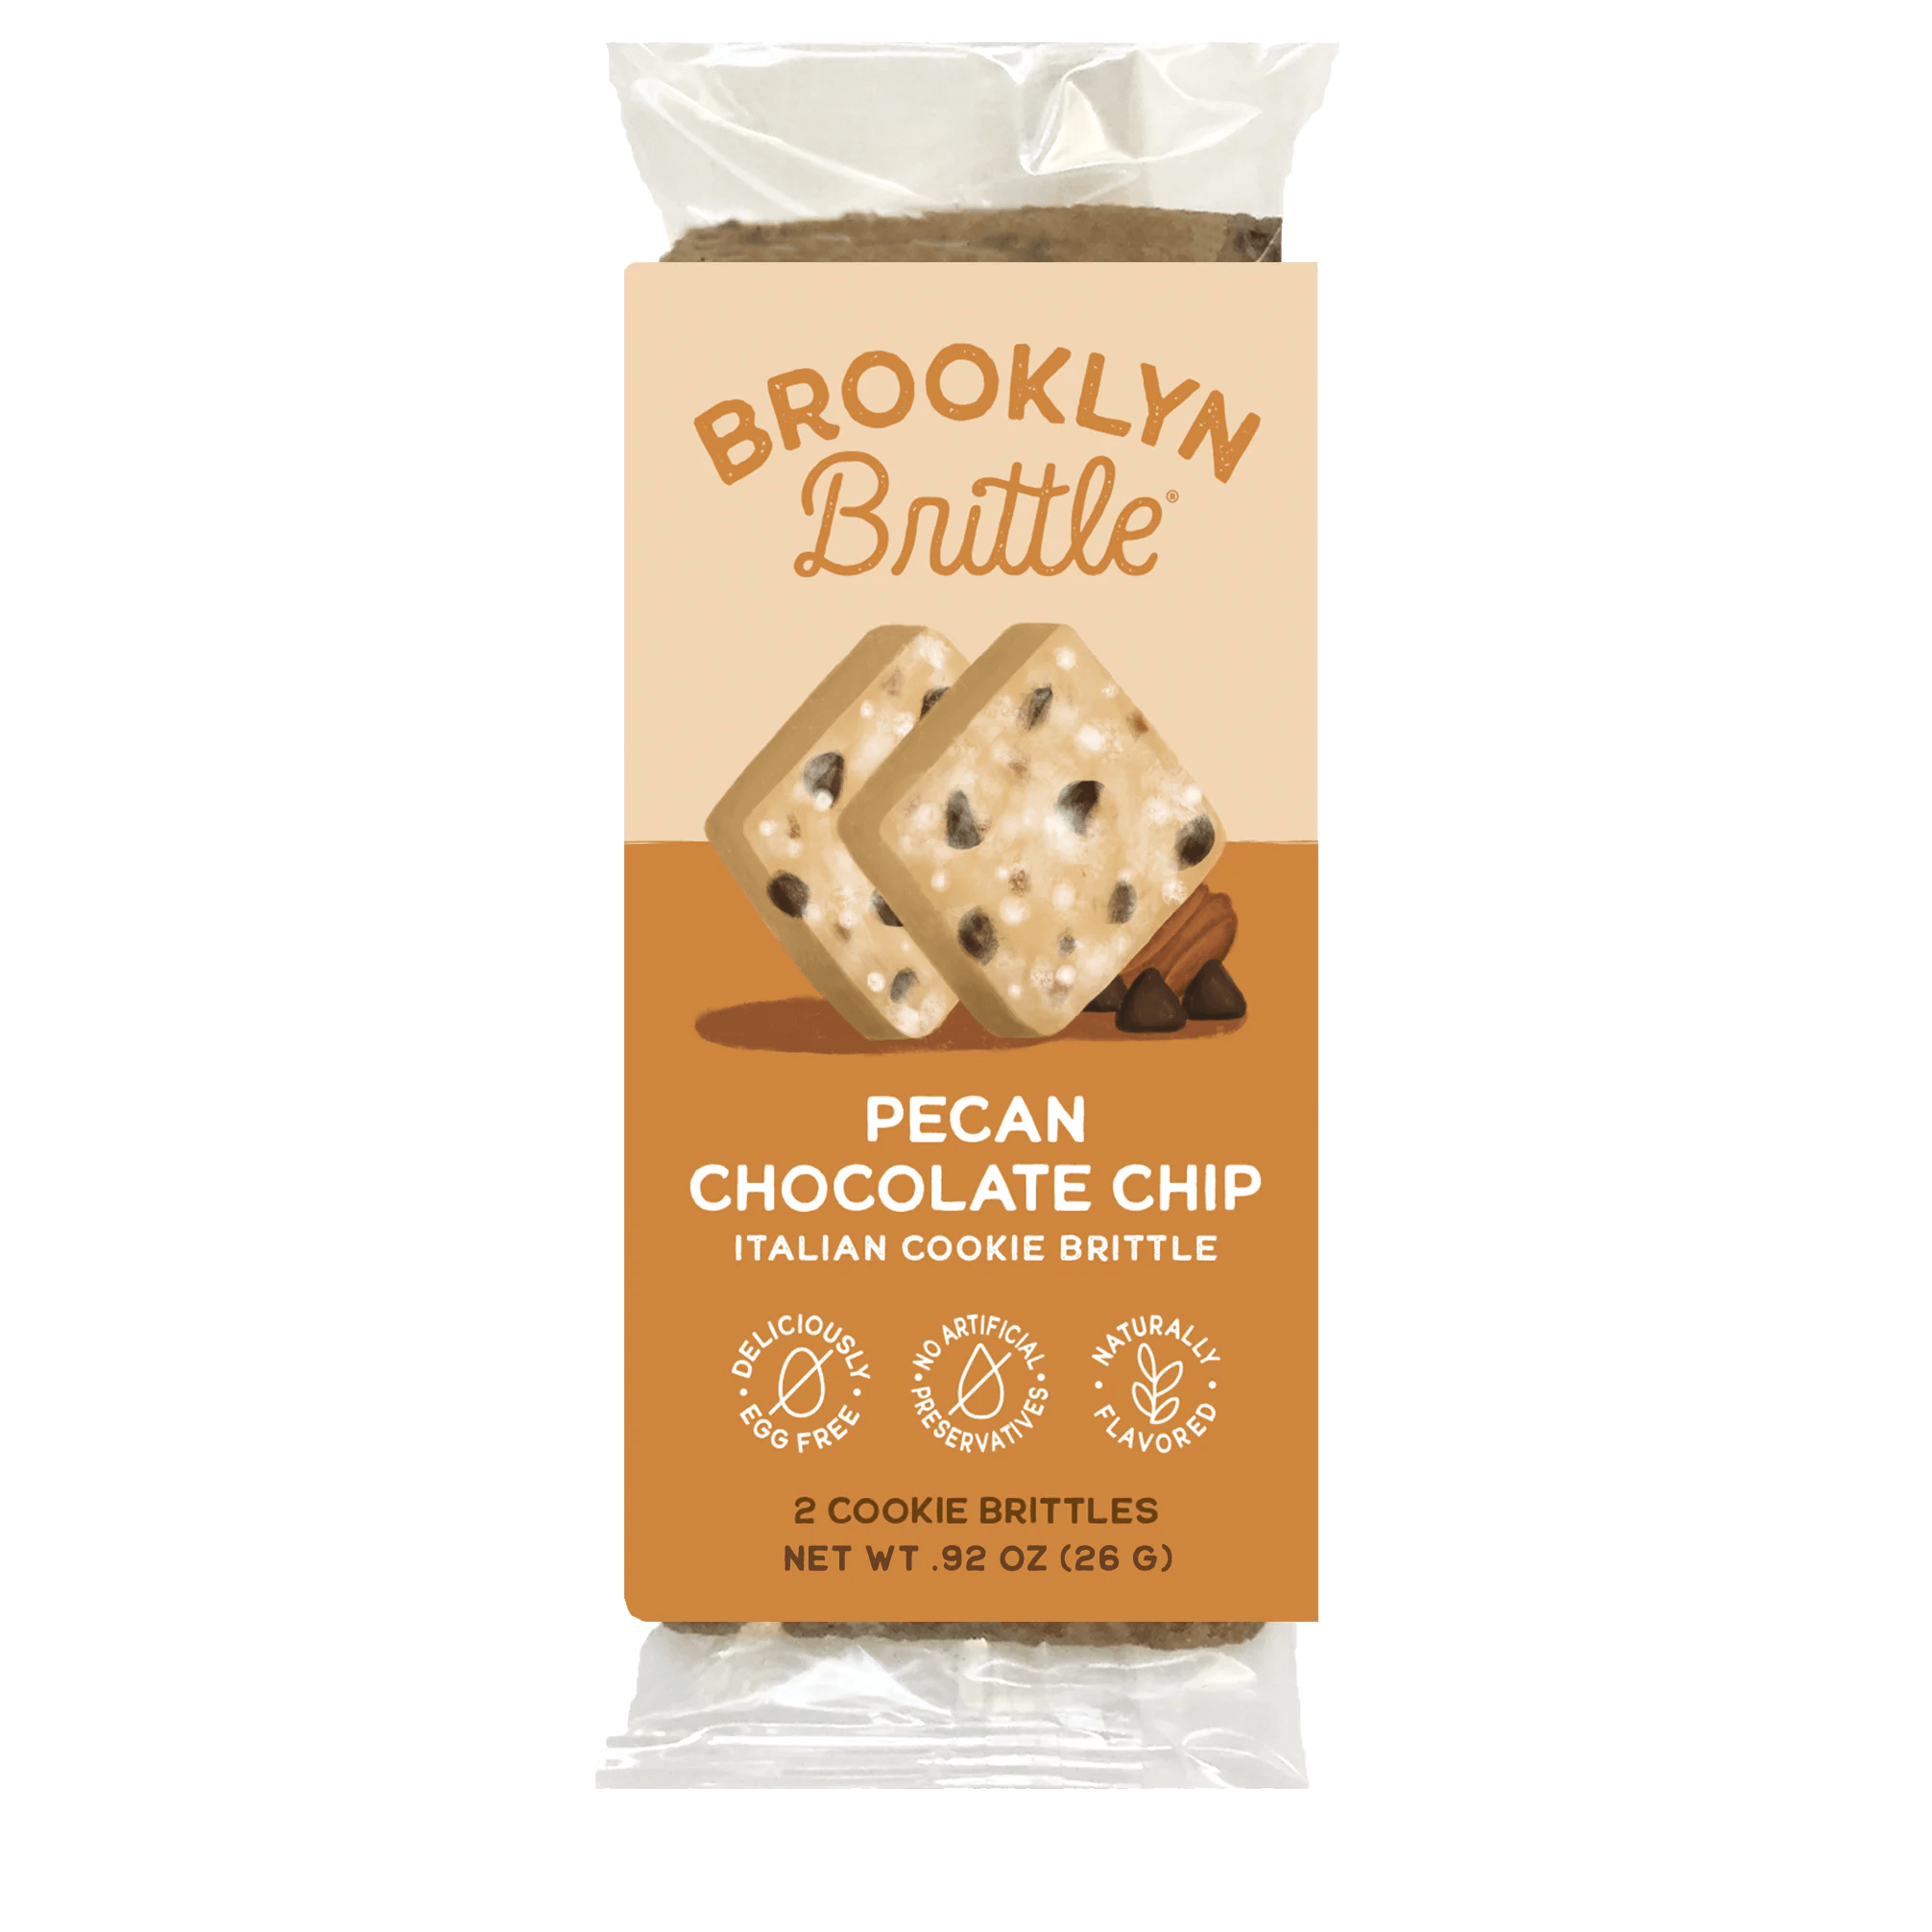 Pecan Chocolate Chip Snack Pack